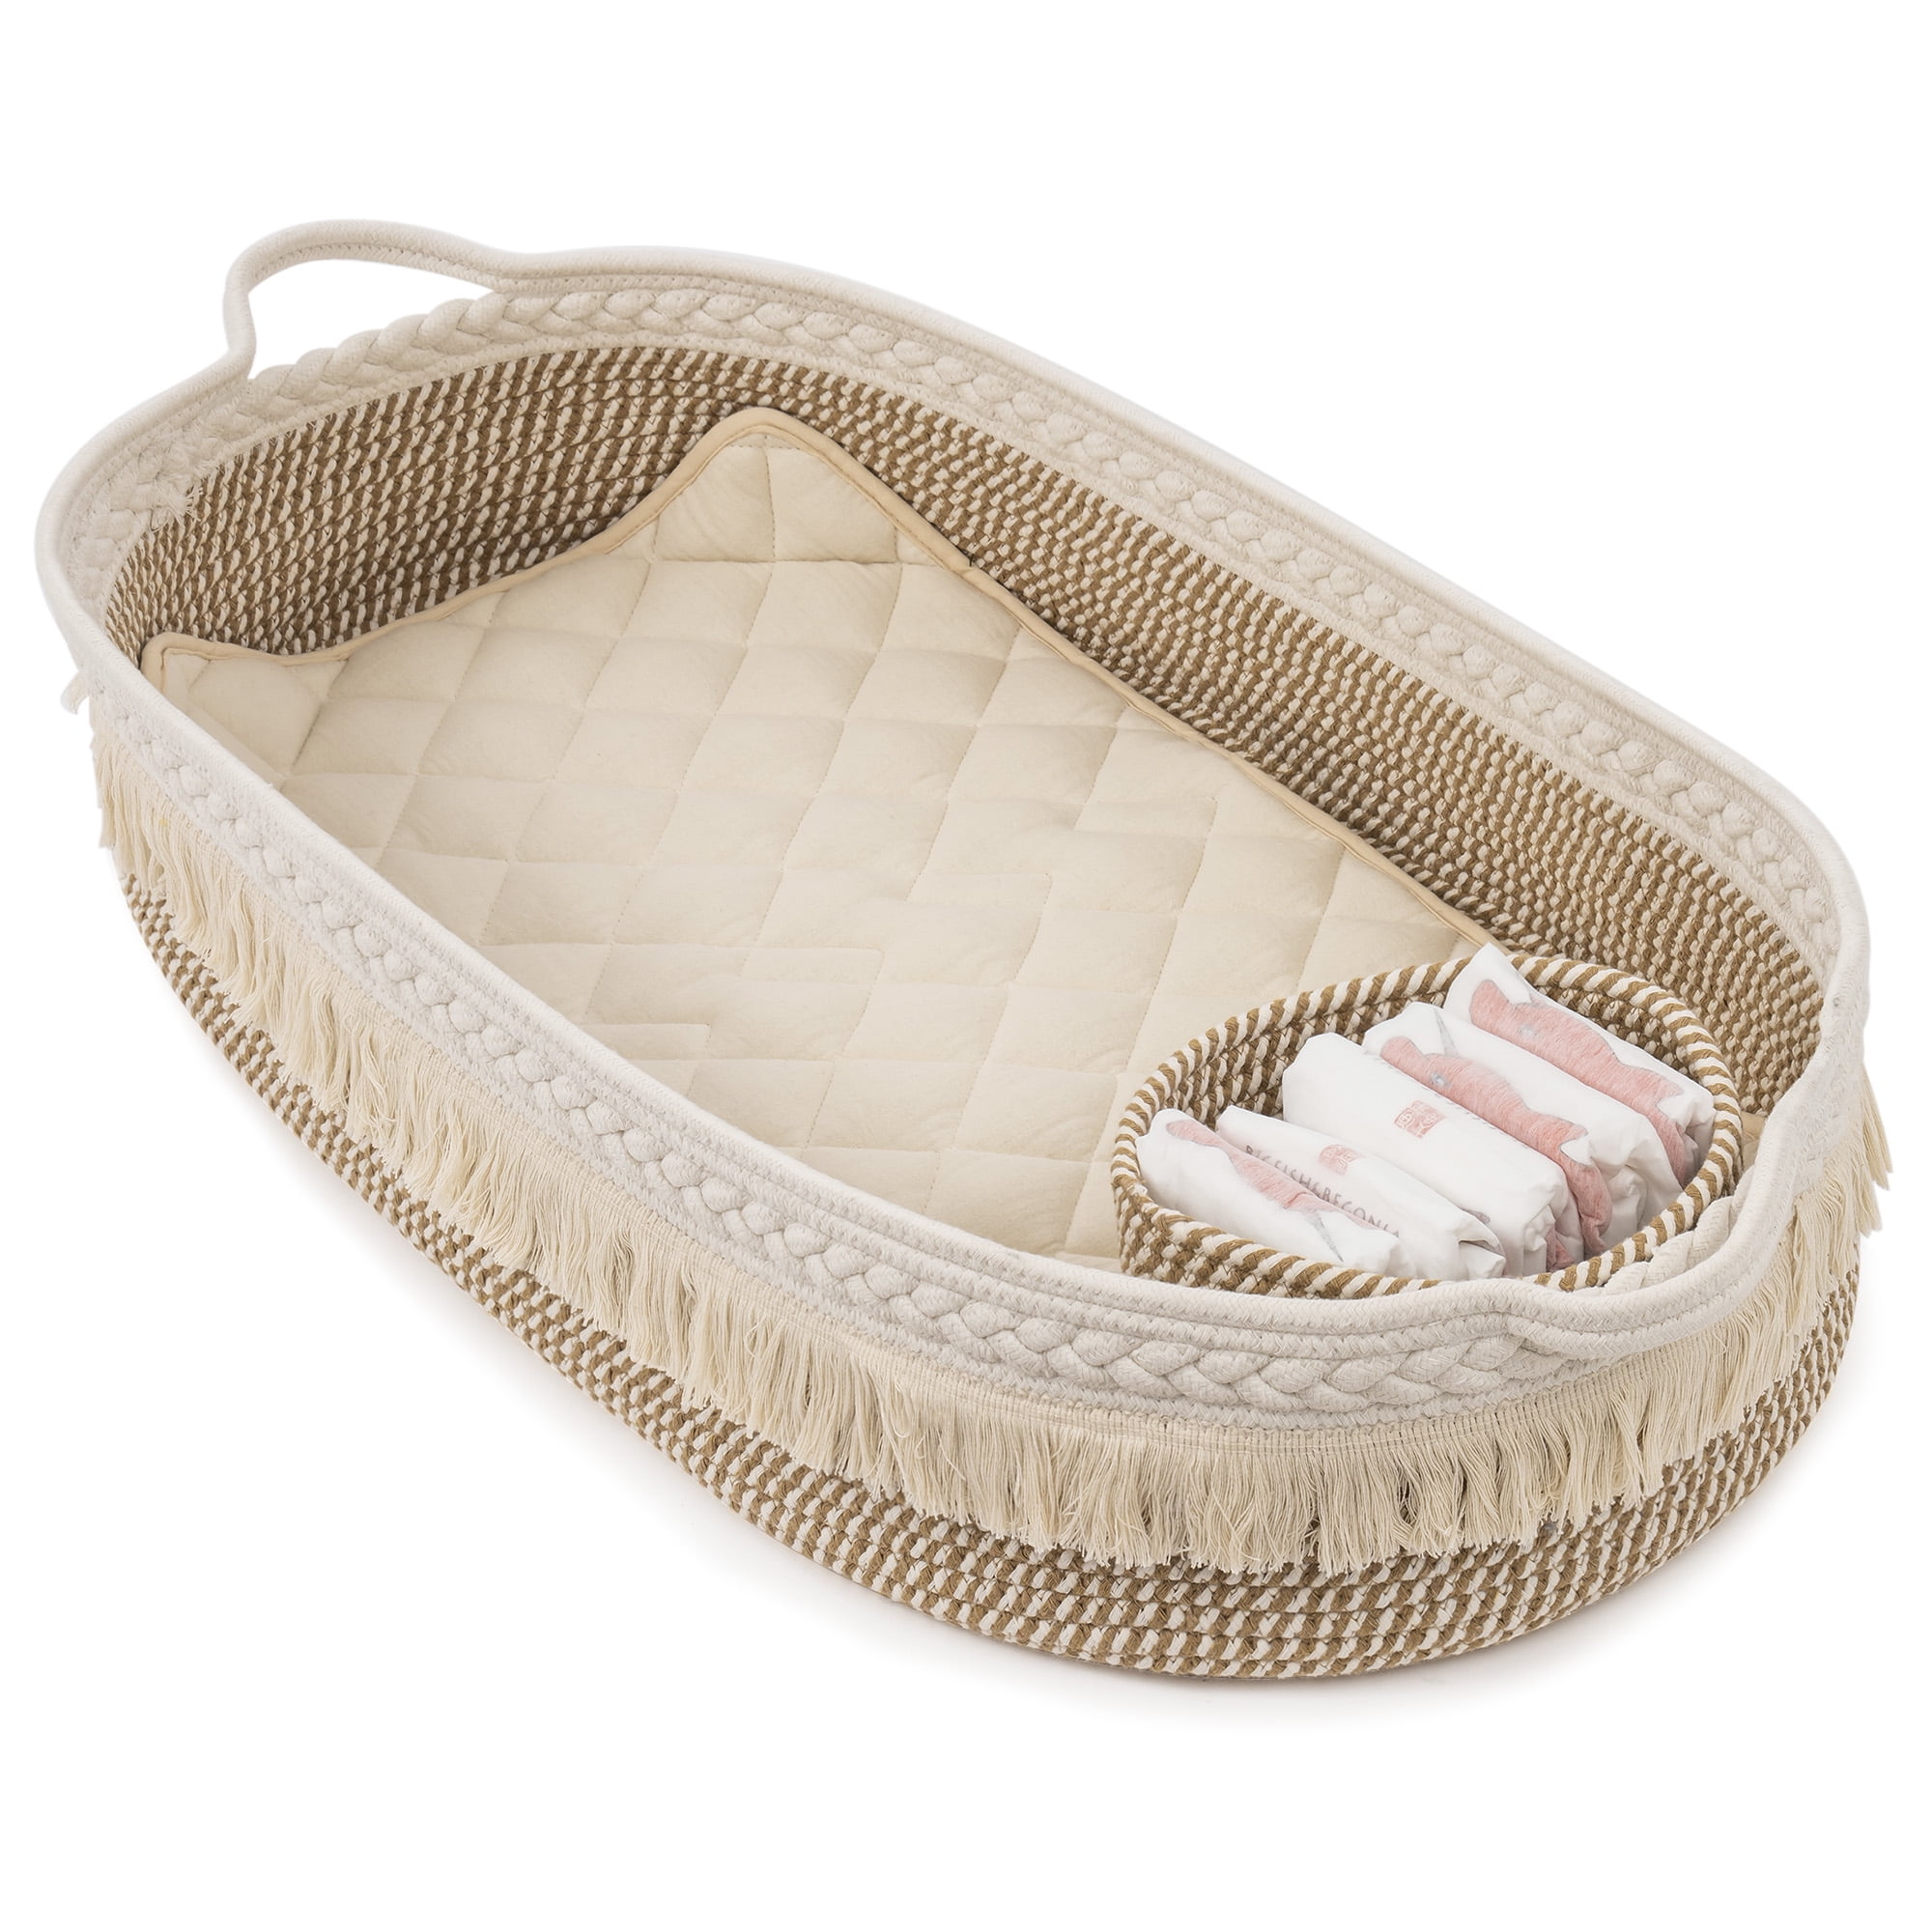  Baby Changing Basket- Cotton Rope Changing Table Topper Moses  Basket, Thick Foam Pad with Removable Cotton Cover- Storage Bag and Plush  Blanket- CPSC Safety Compliant- Boho Decor in Coffee Color 